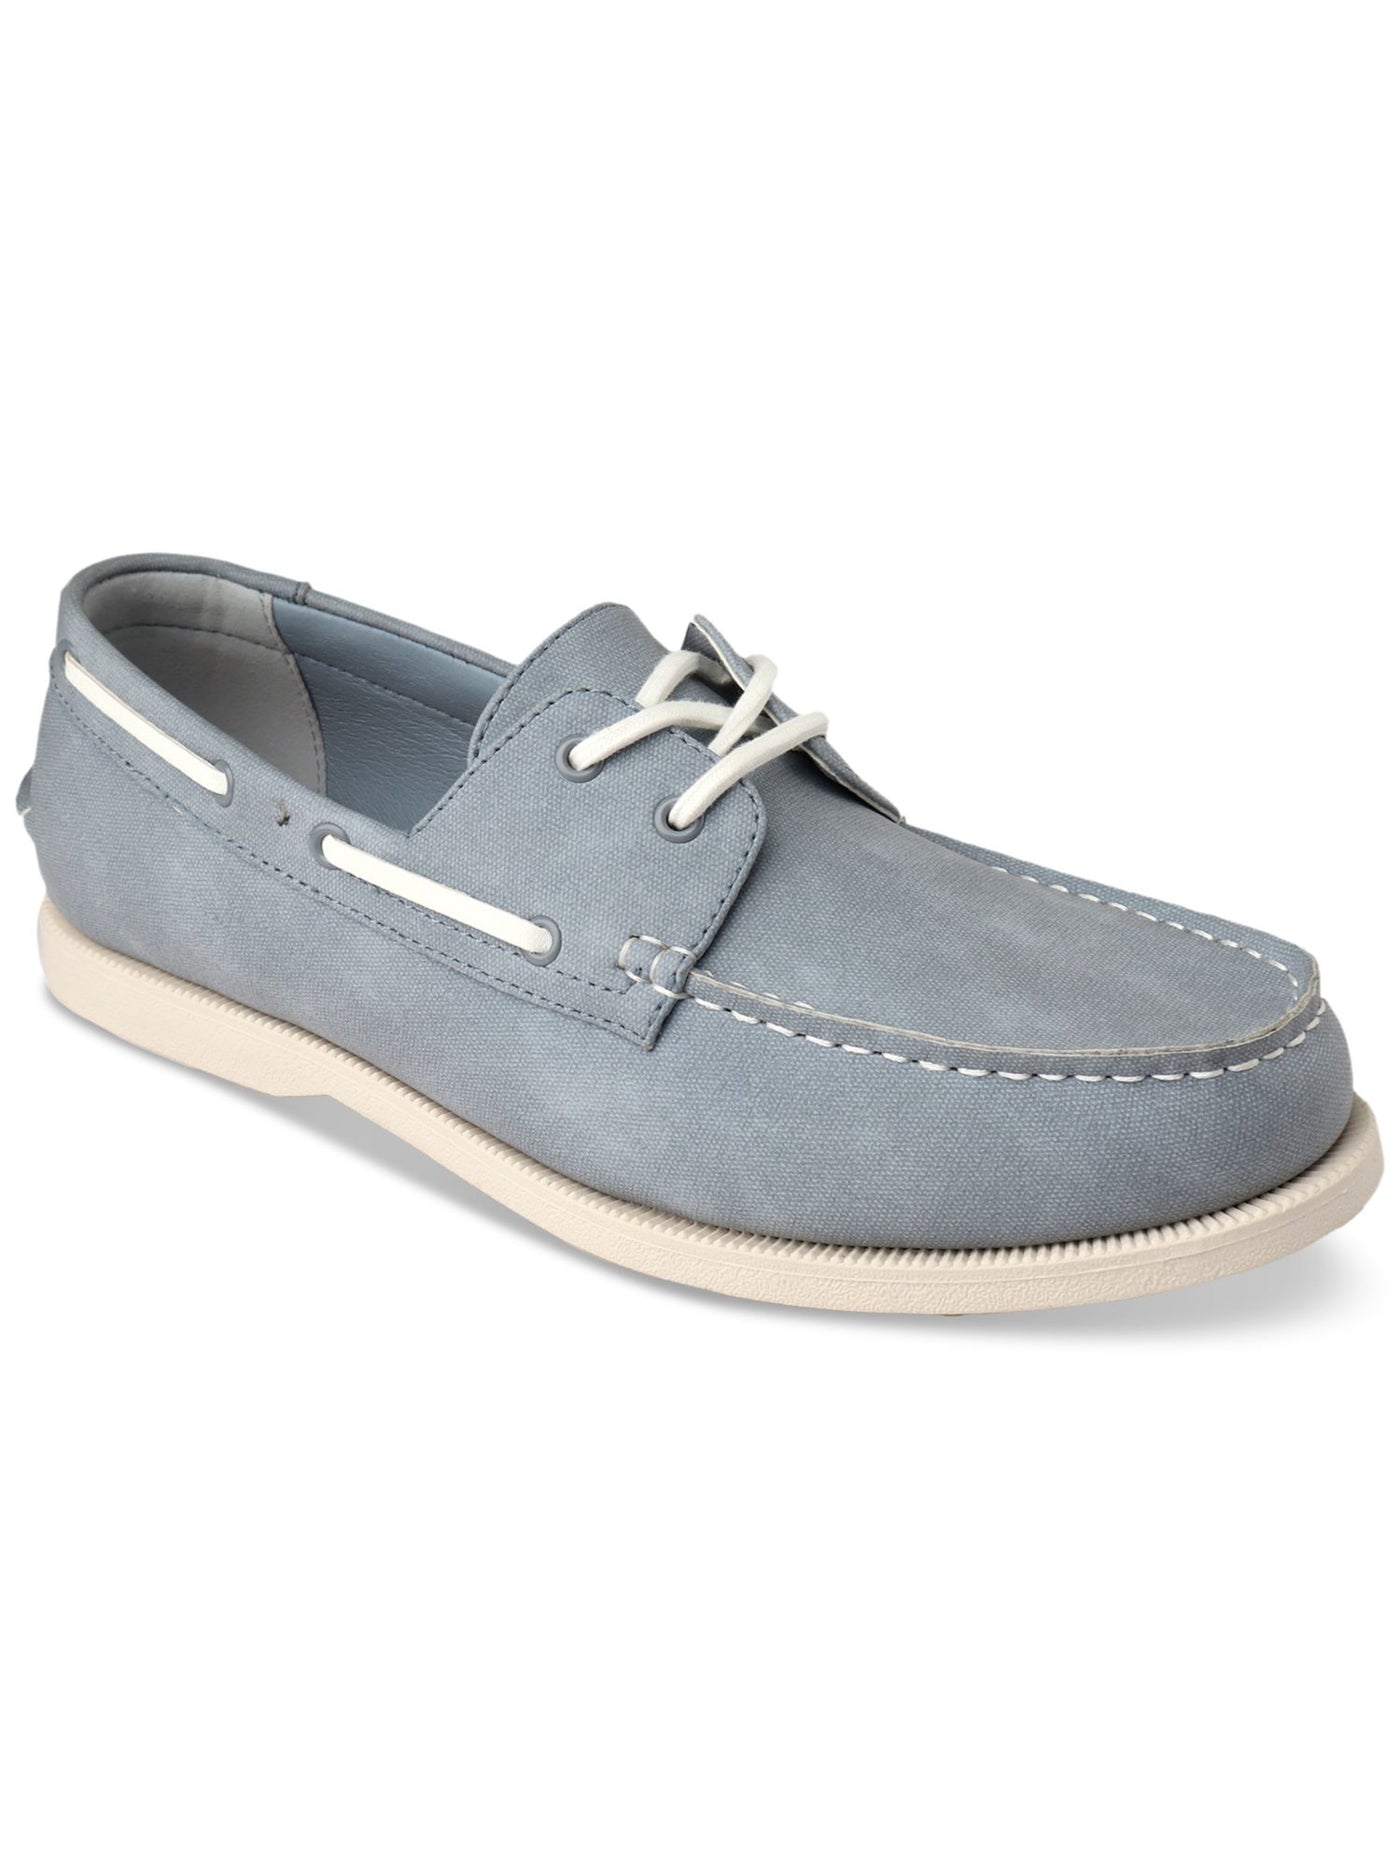 CLUBROOM Womens Light Blue Moc Toe Padded Elliot Round Toe Lace-Up Boat Shoes 11.5 M